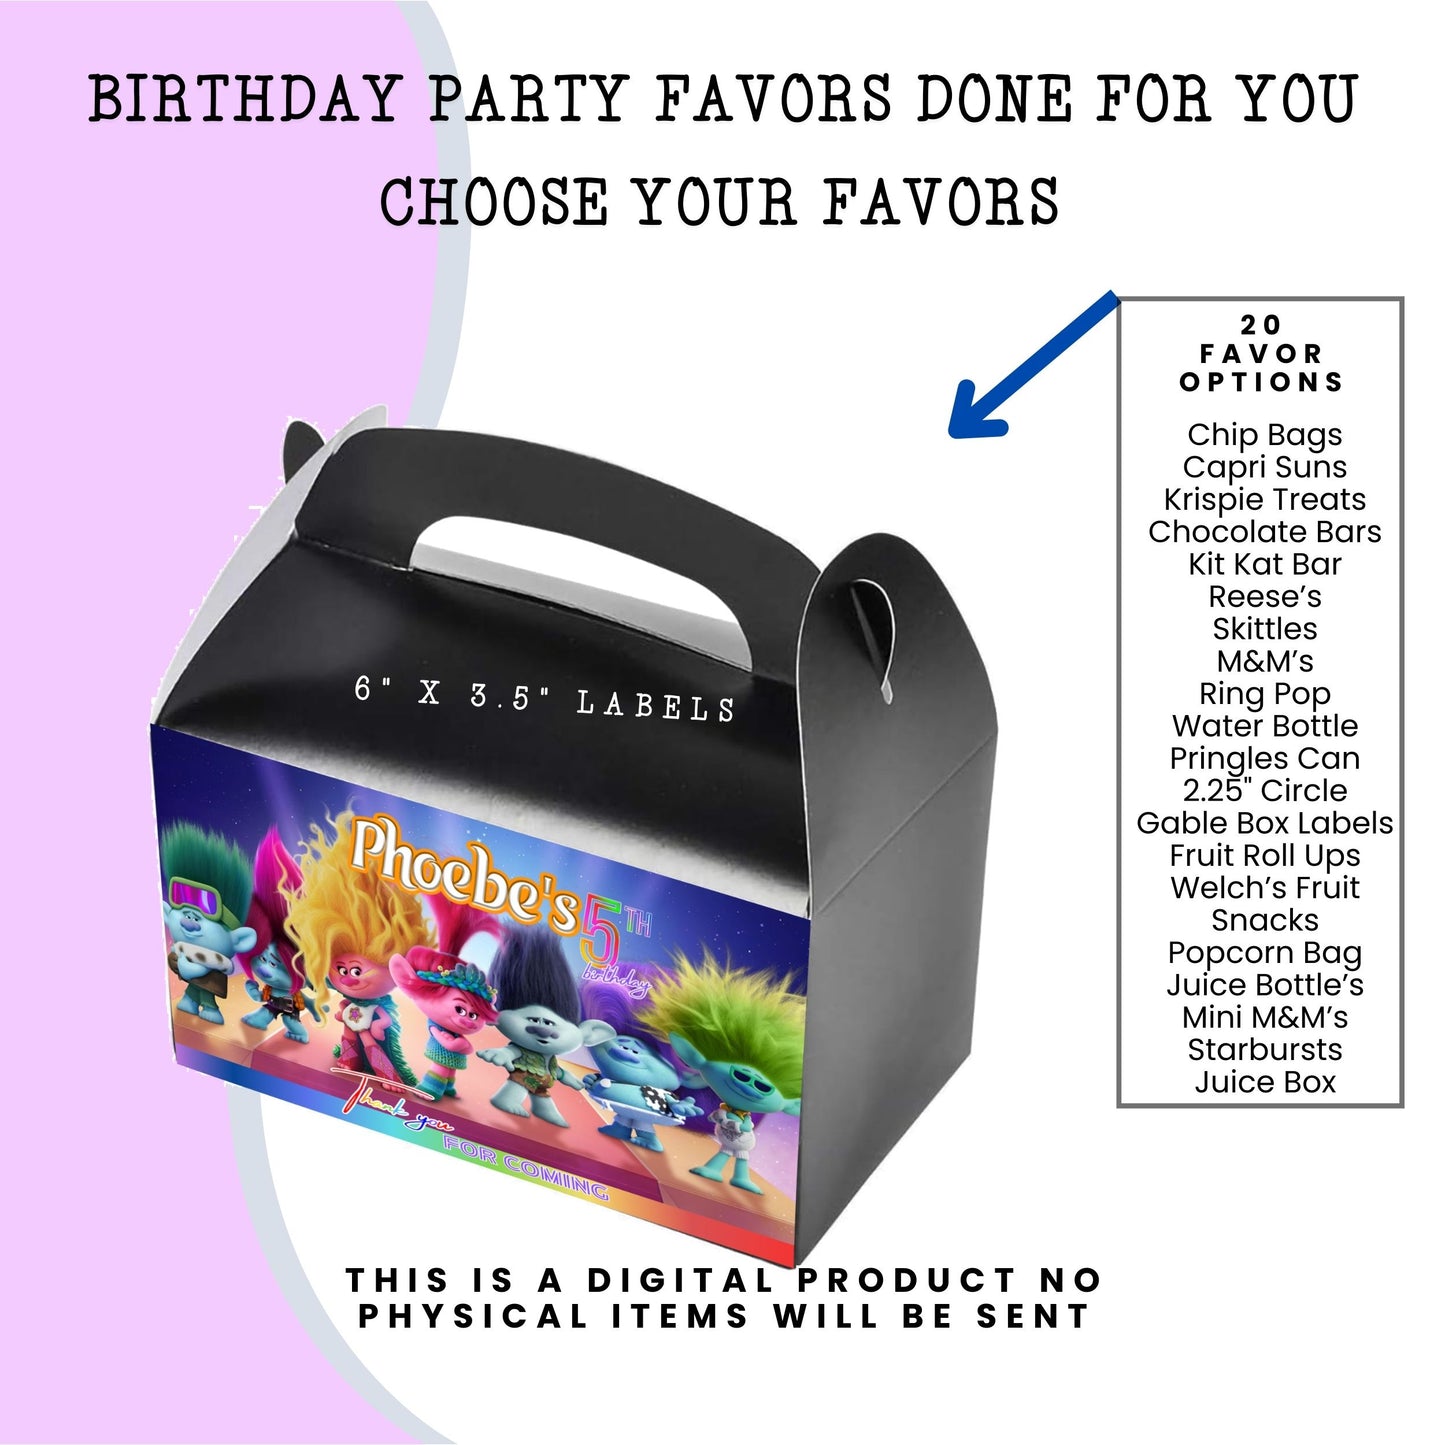 Band Together Birthday Party Favors DFY